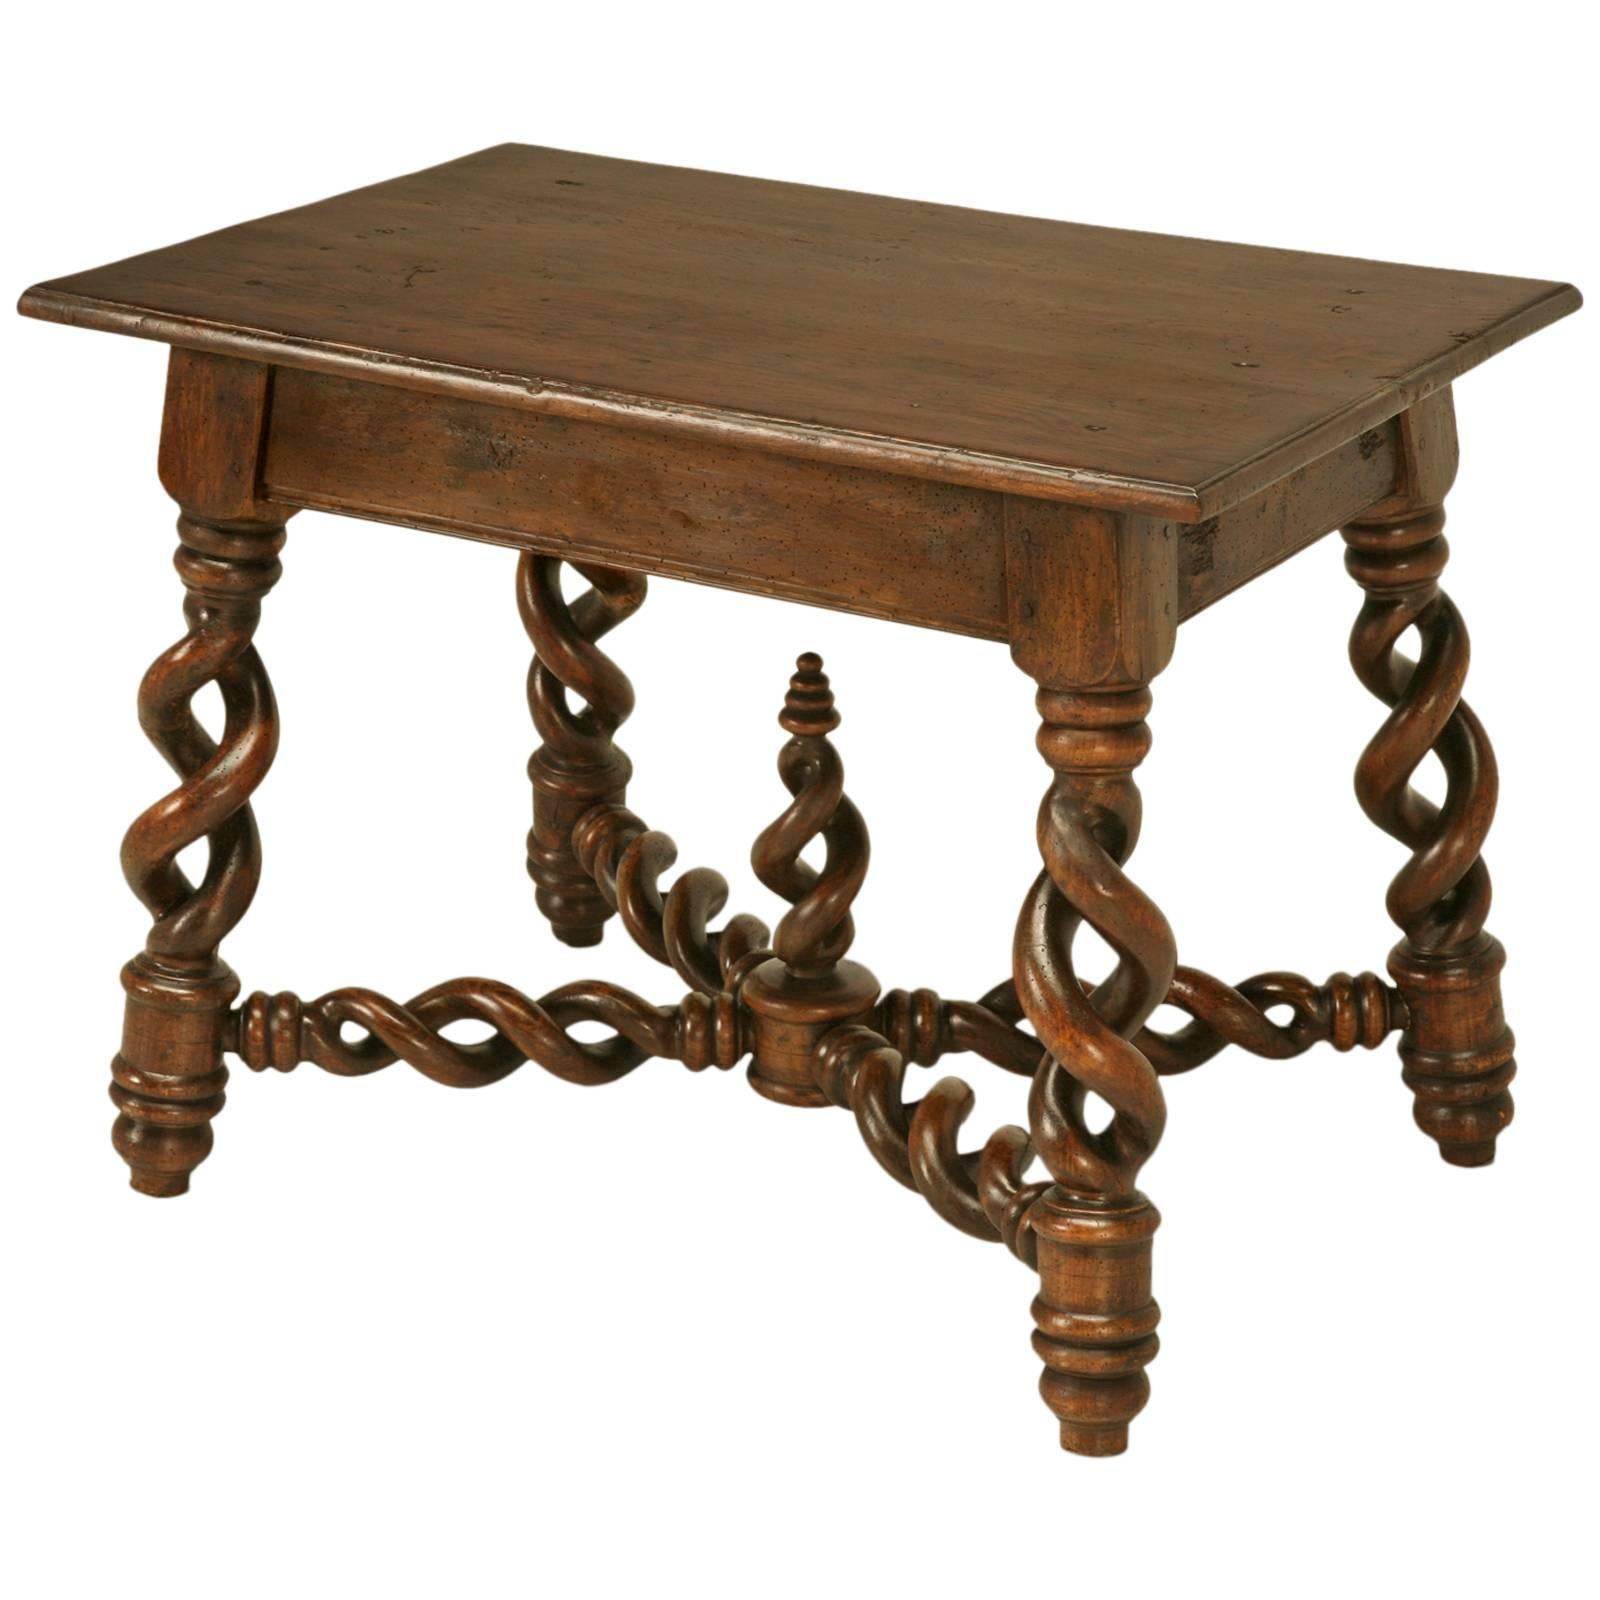 French Small Desk or End Table Unusual Open Barley Twist Legs c1800's Restored For Sale